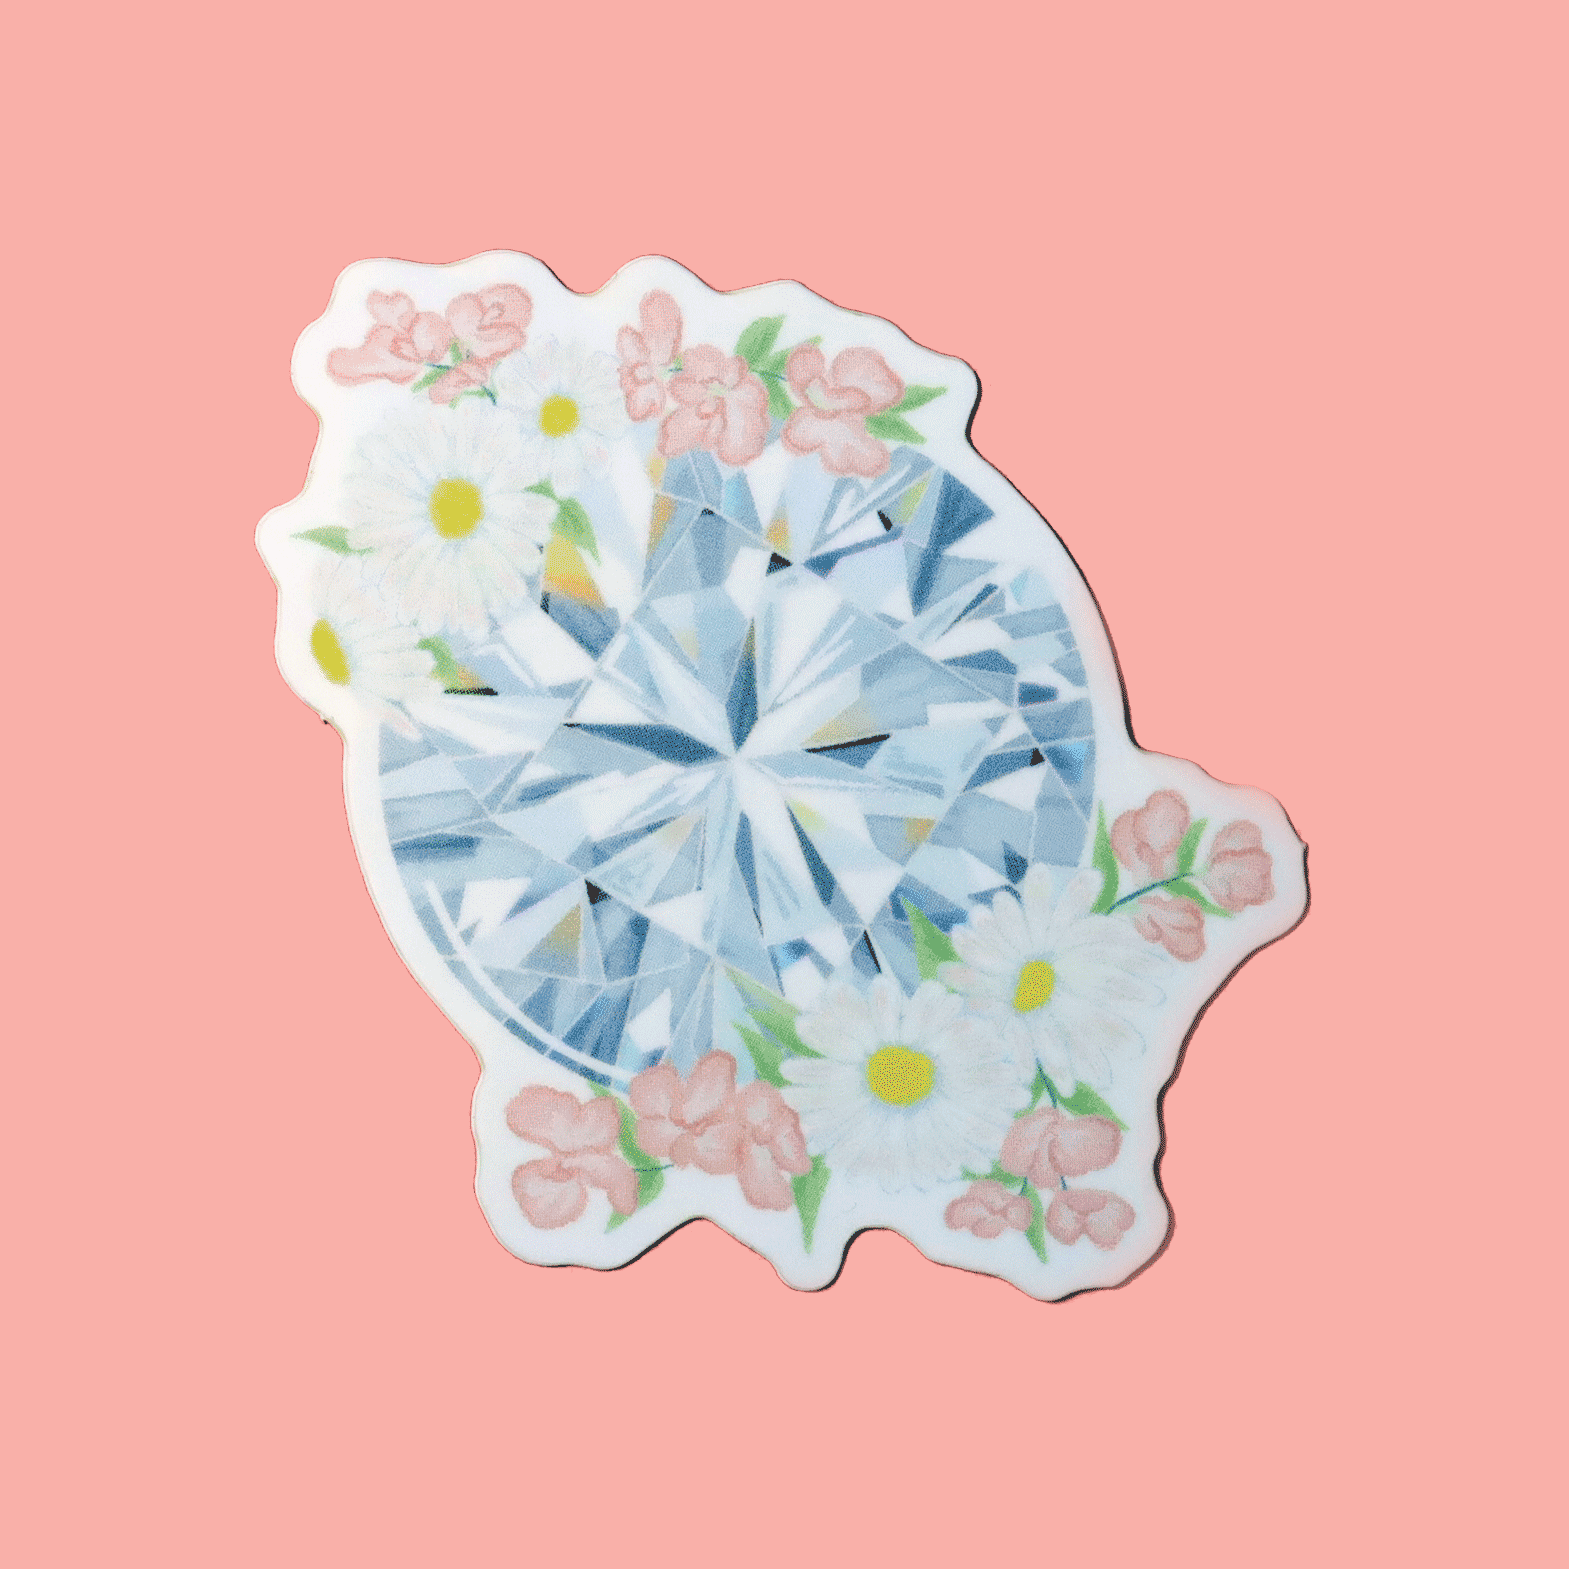 2" sticker featuring a diamond surrounded by daisies and sweet pea.